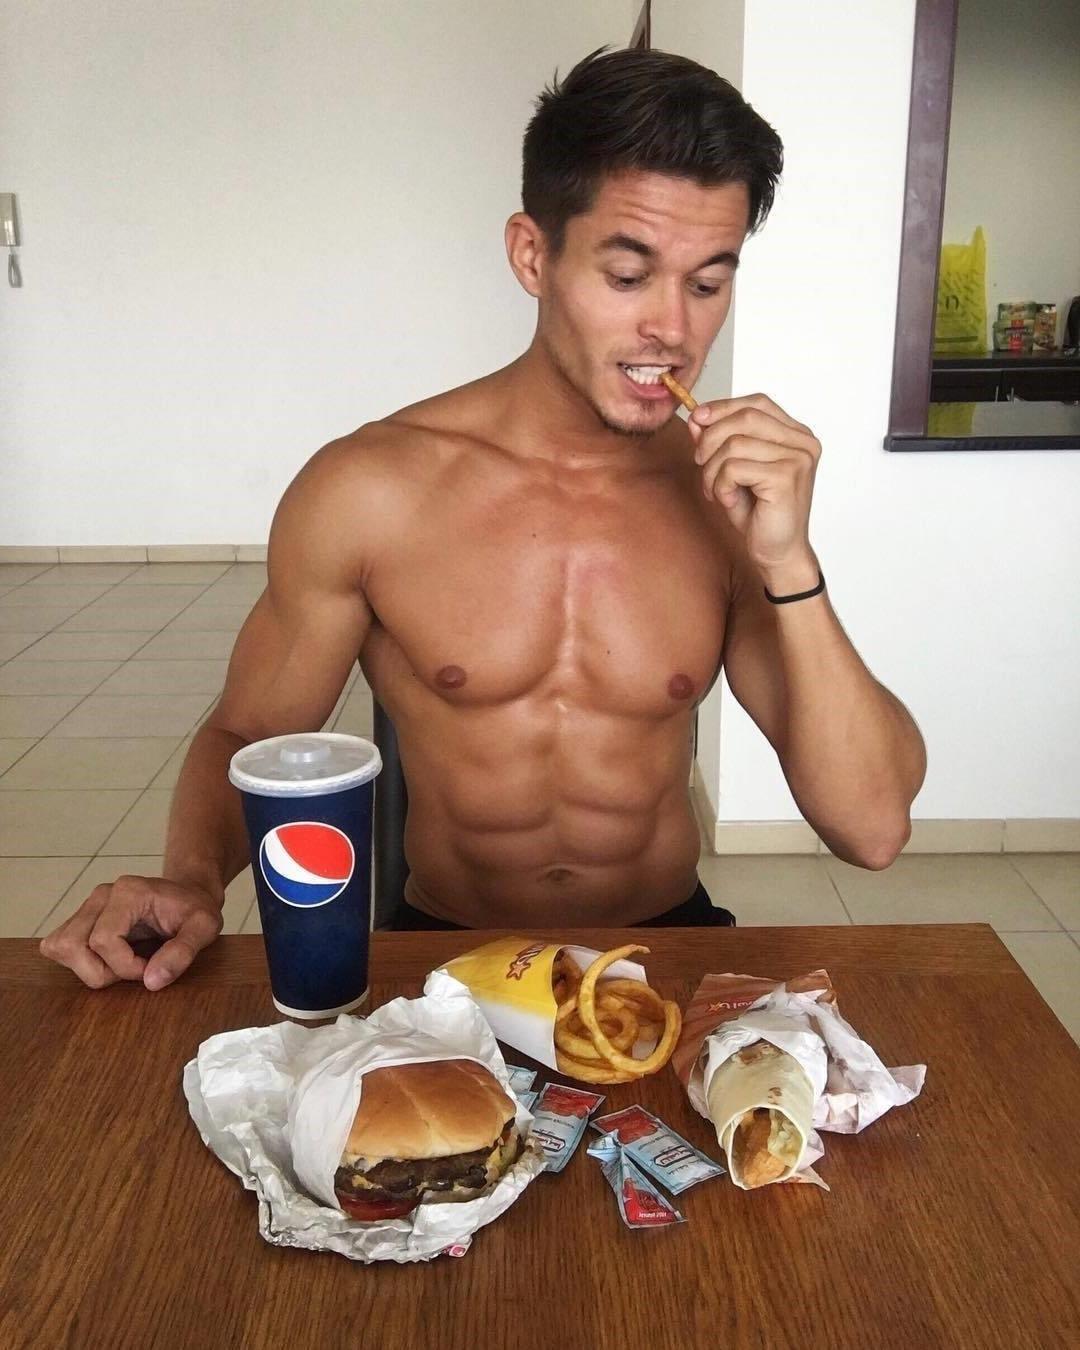 hot-guys-drinking-pepsi-eating-french-fries-fast-food-hunk-shirtless-fit-body-pecs-abs